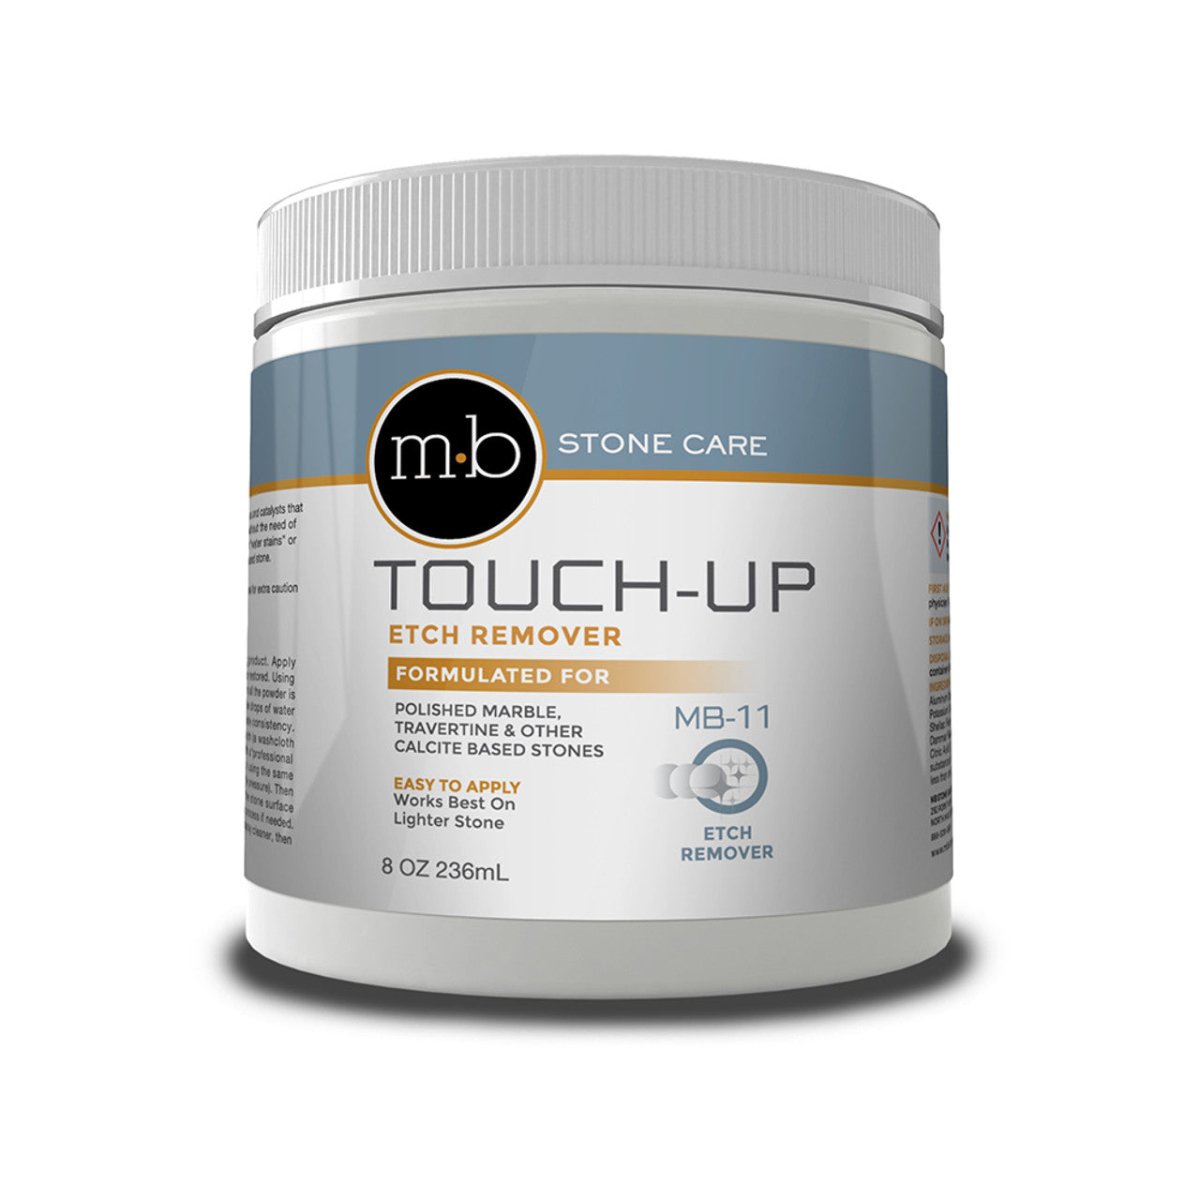 MB-11 Touch Up - MB Stone Care